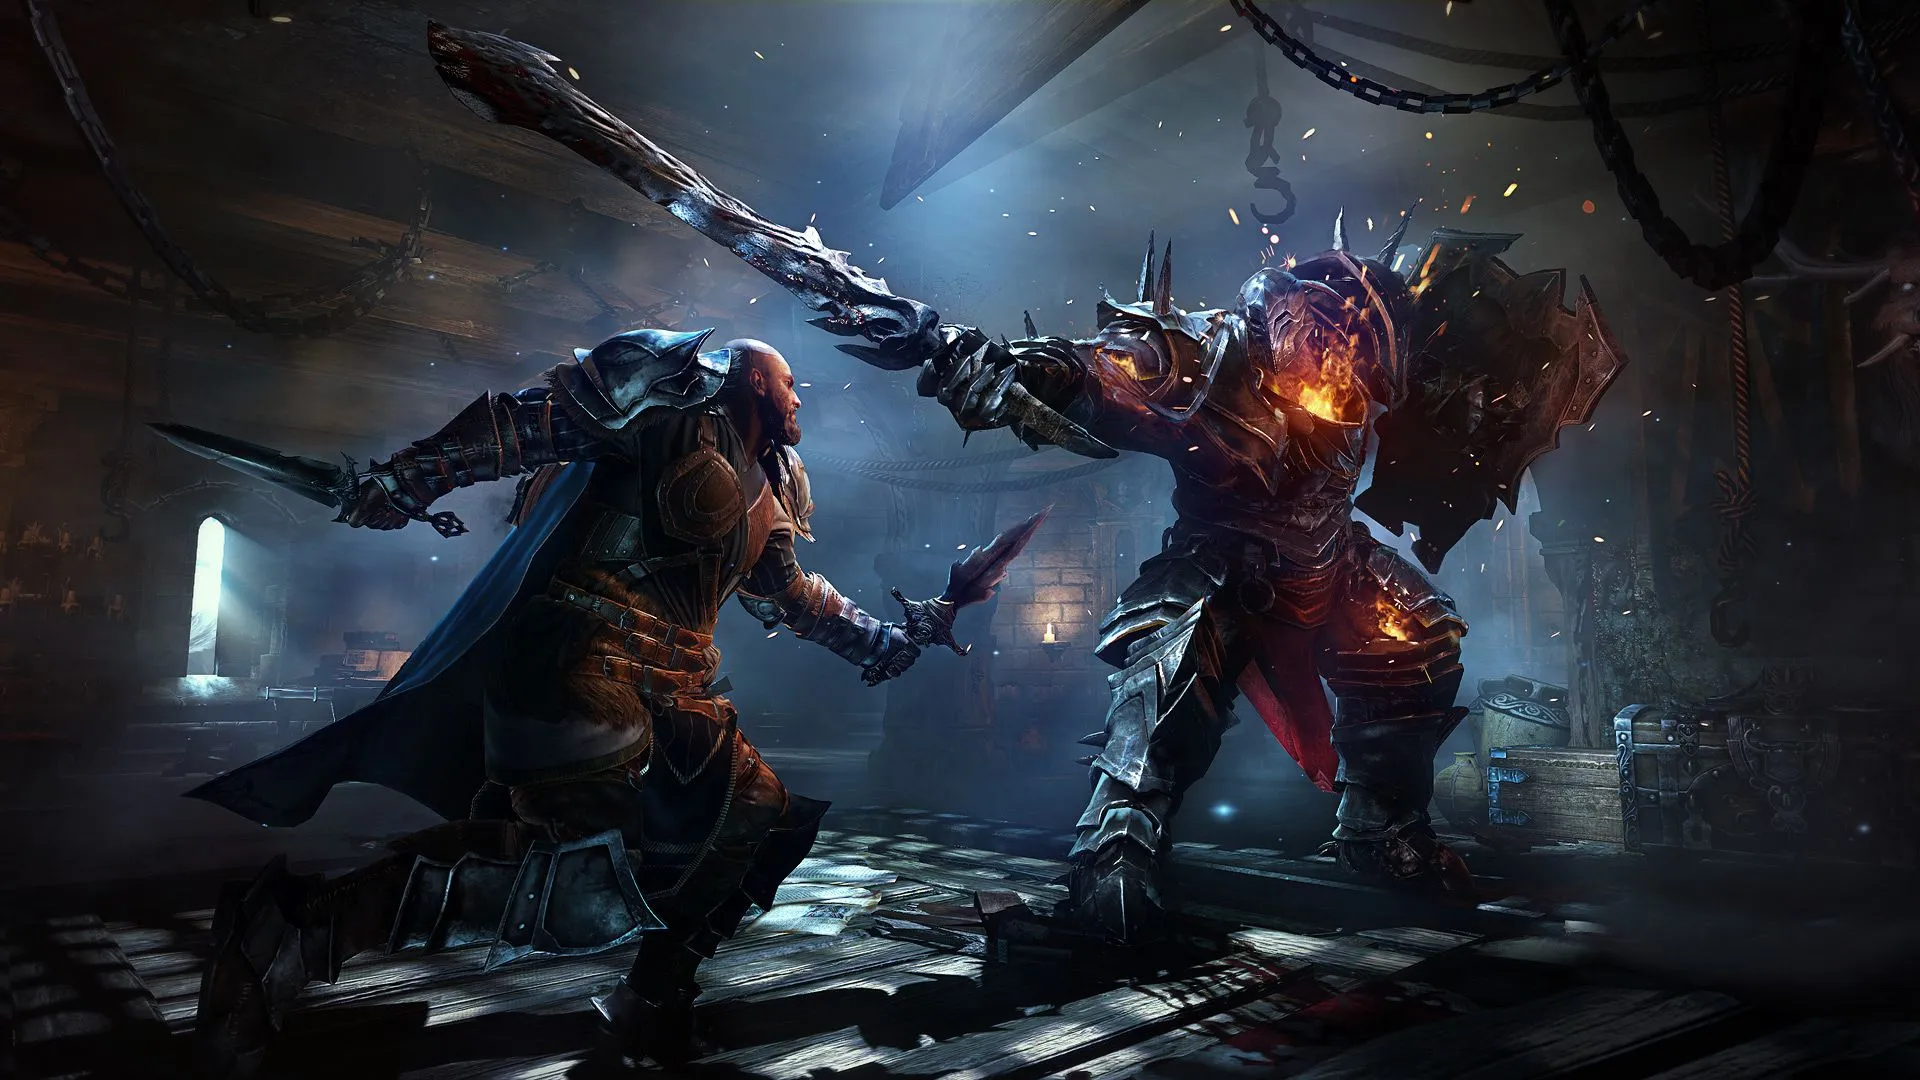 Lords of the Fallen New Game Plus guide